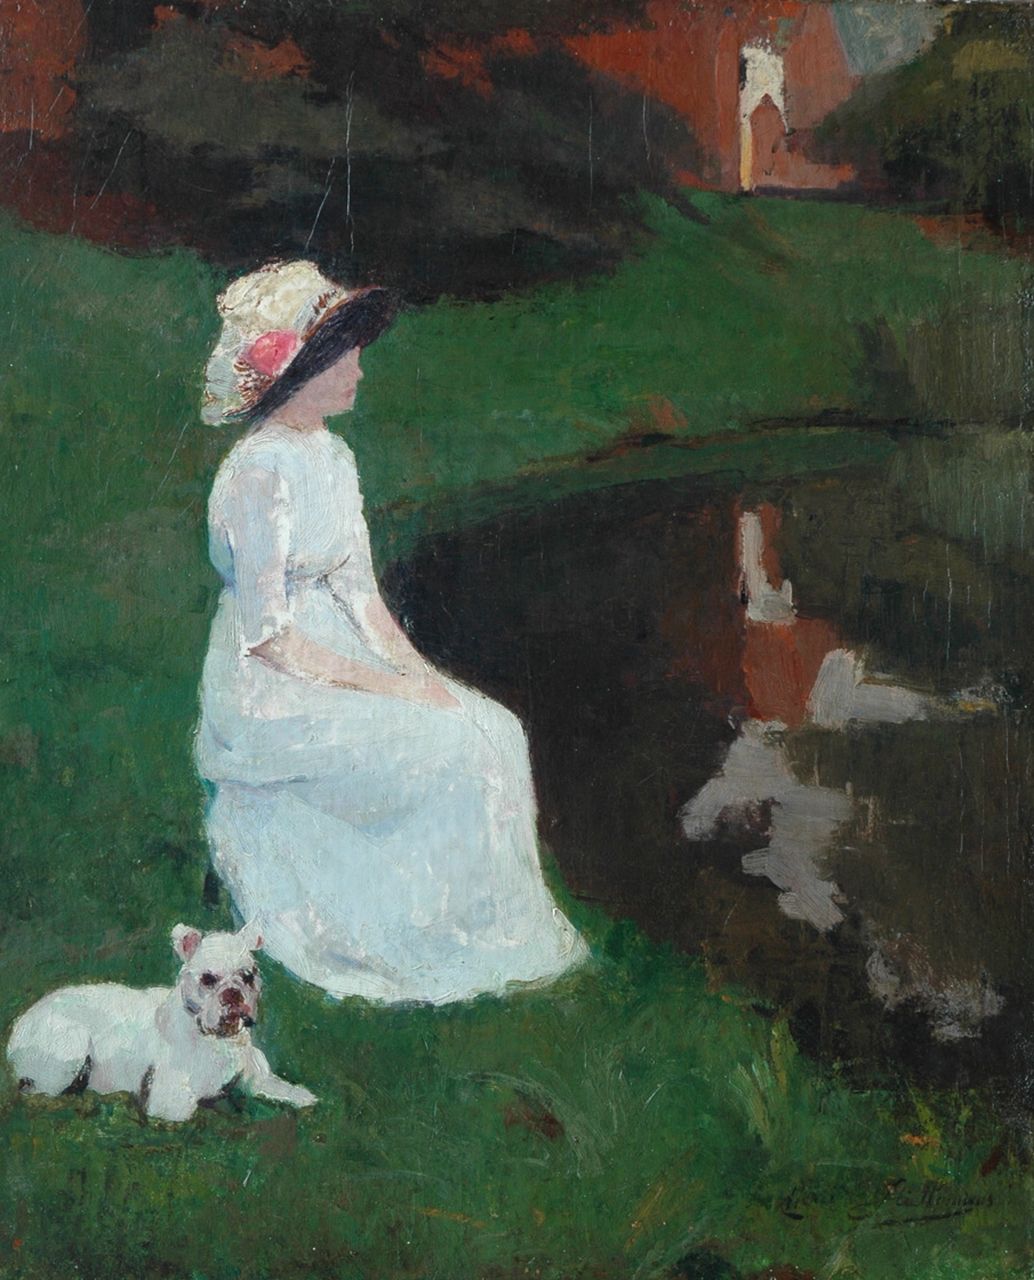 Stiellemans H.V.  | Henri Victor Stiellemans | Paintings offered for sale | Lady with a bulldog in the park, oil on canvas 59.9 x 50.0 cm, signed l.r.